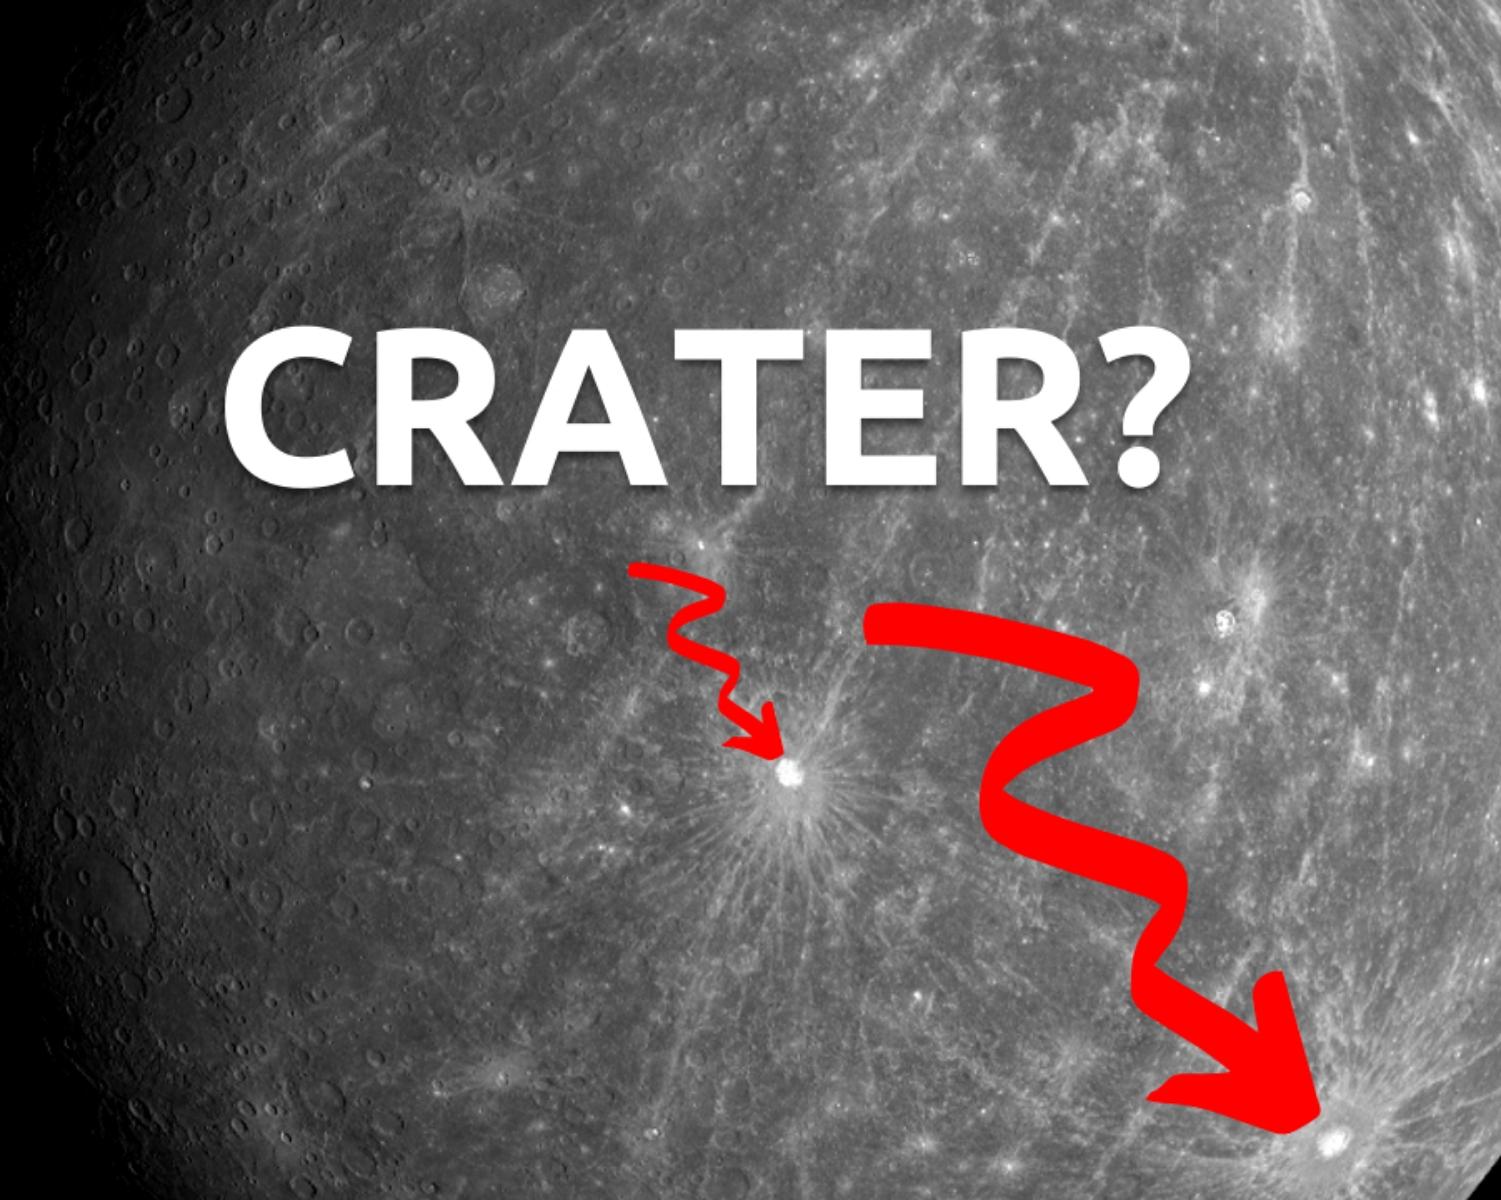 Why Does Mercury Have More Craters Than The Other Planets?